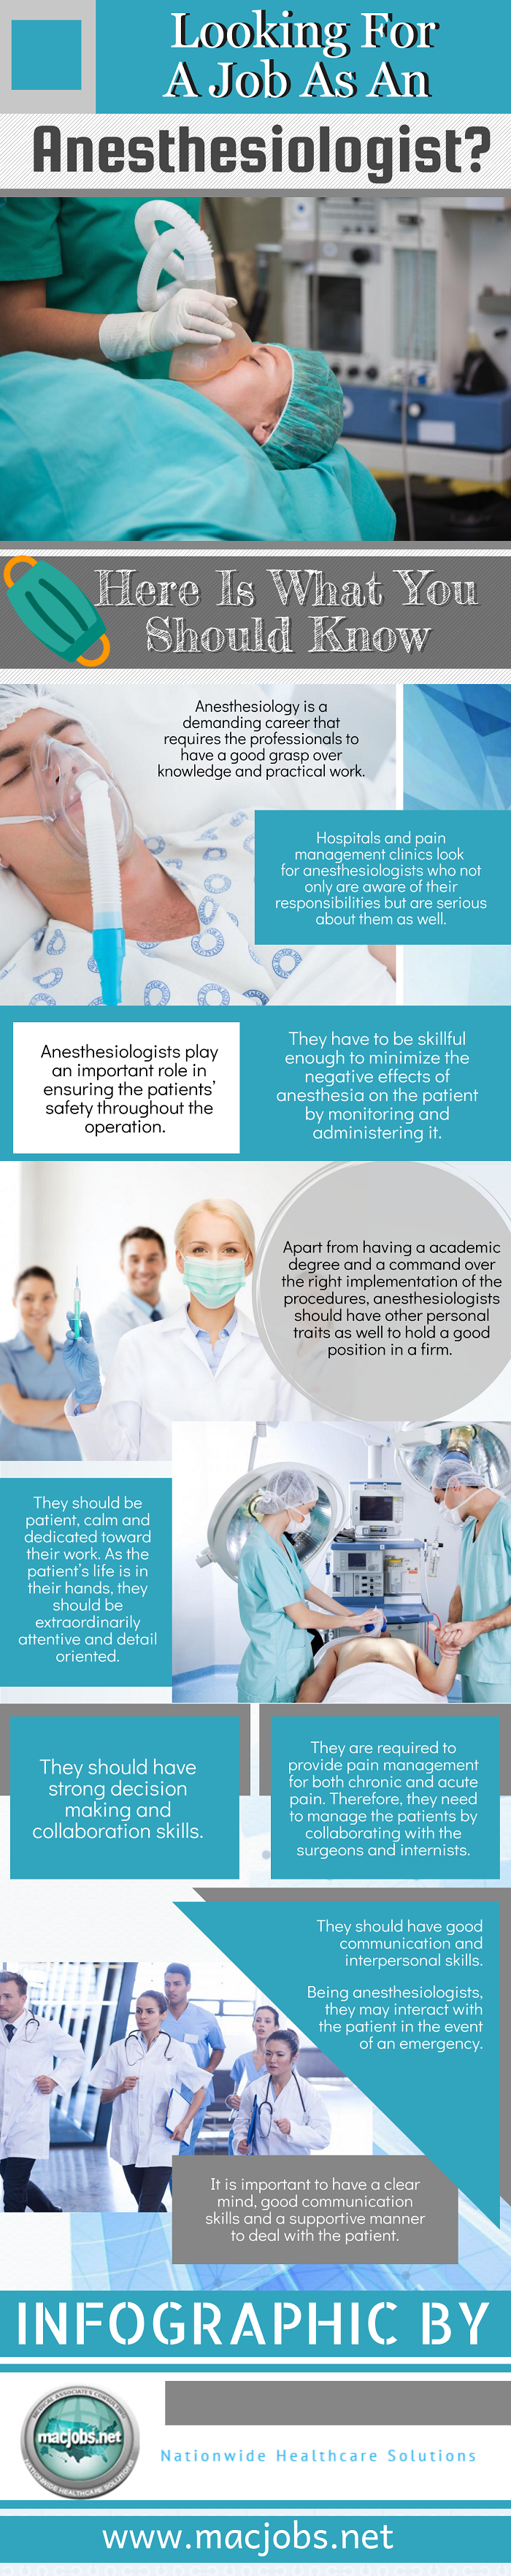 Looking for a job as an anesthesiologist?